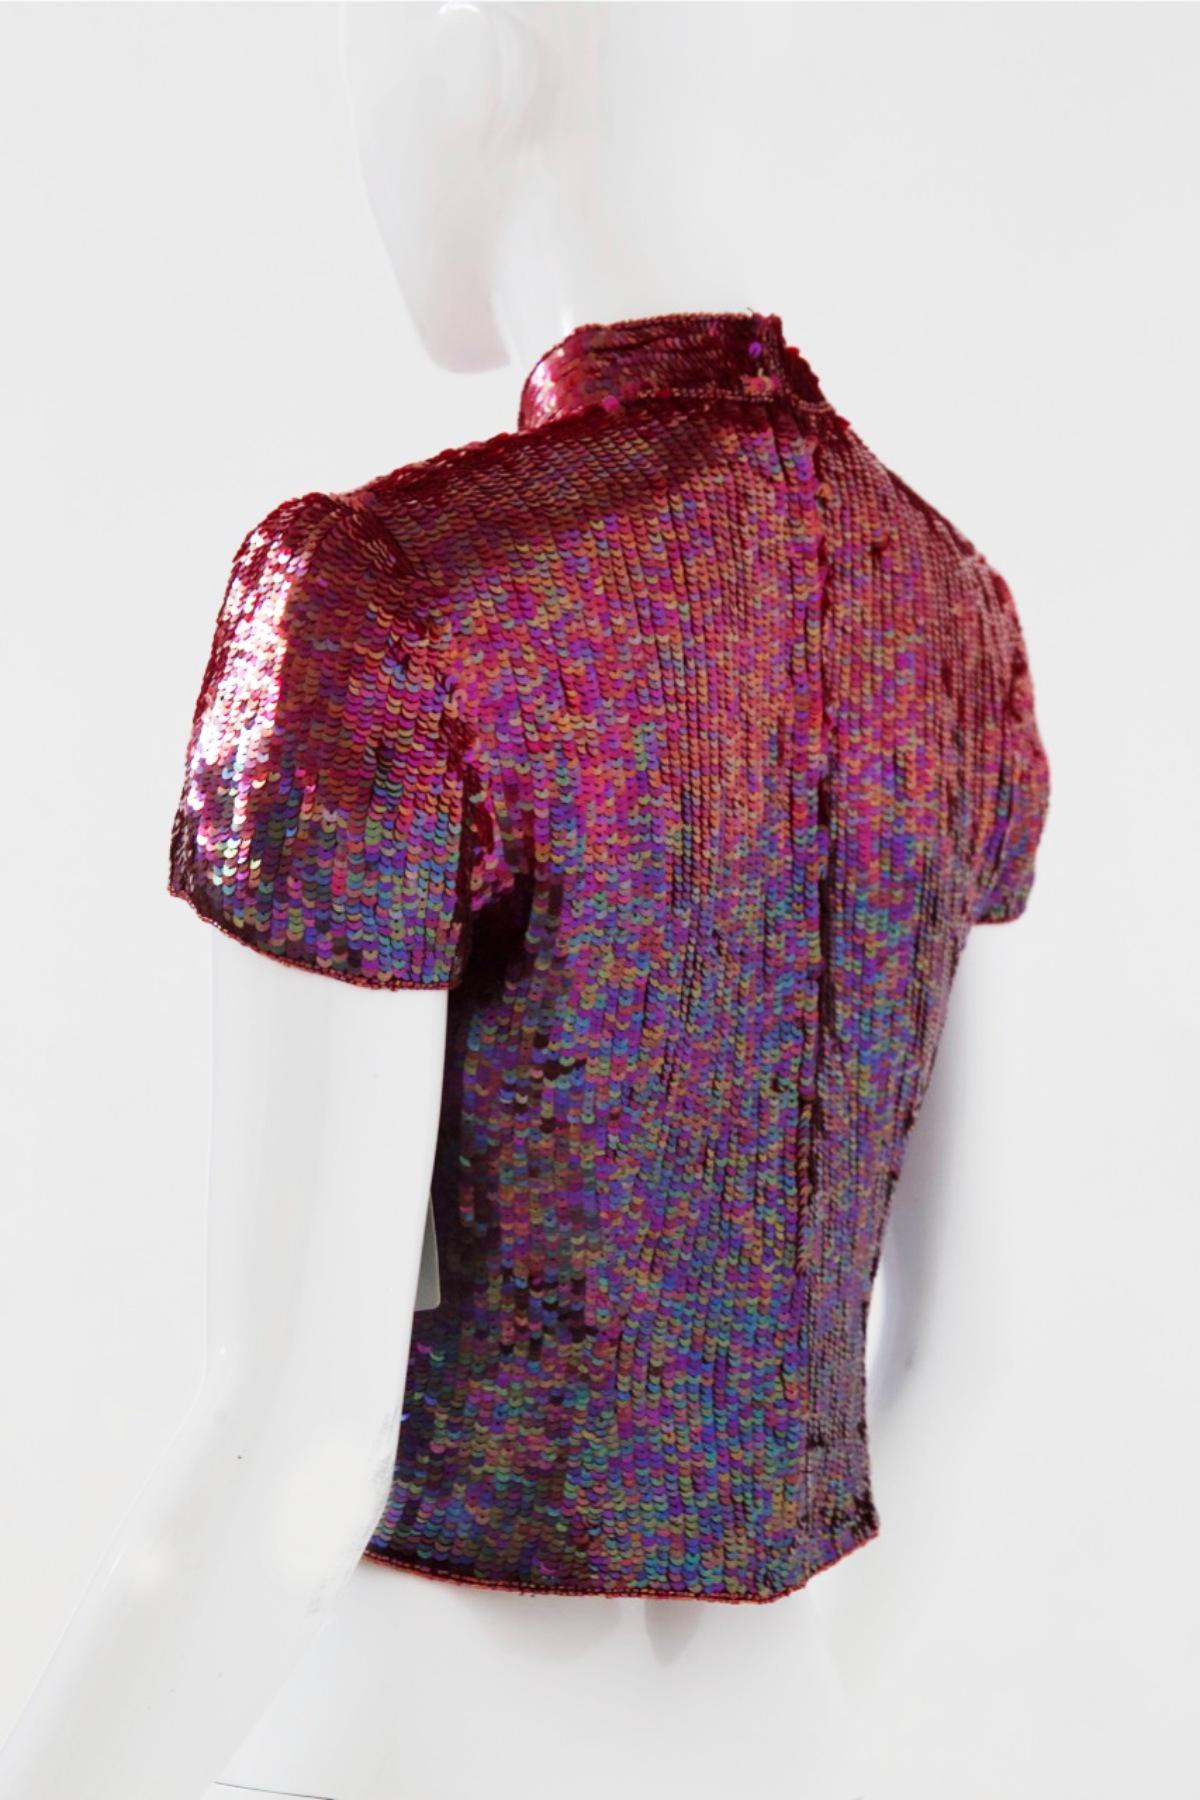 Adrianna Papéll Vintage Sequin Top For Sale 3